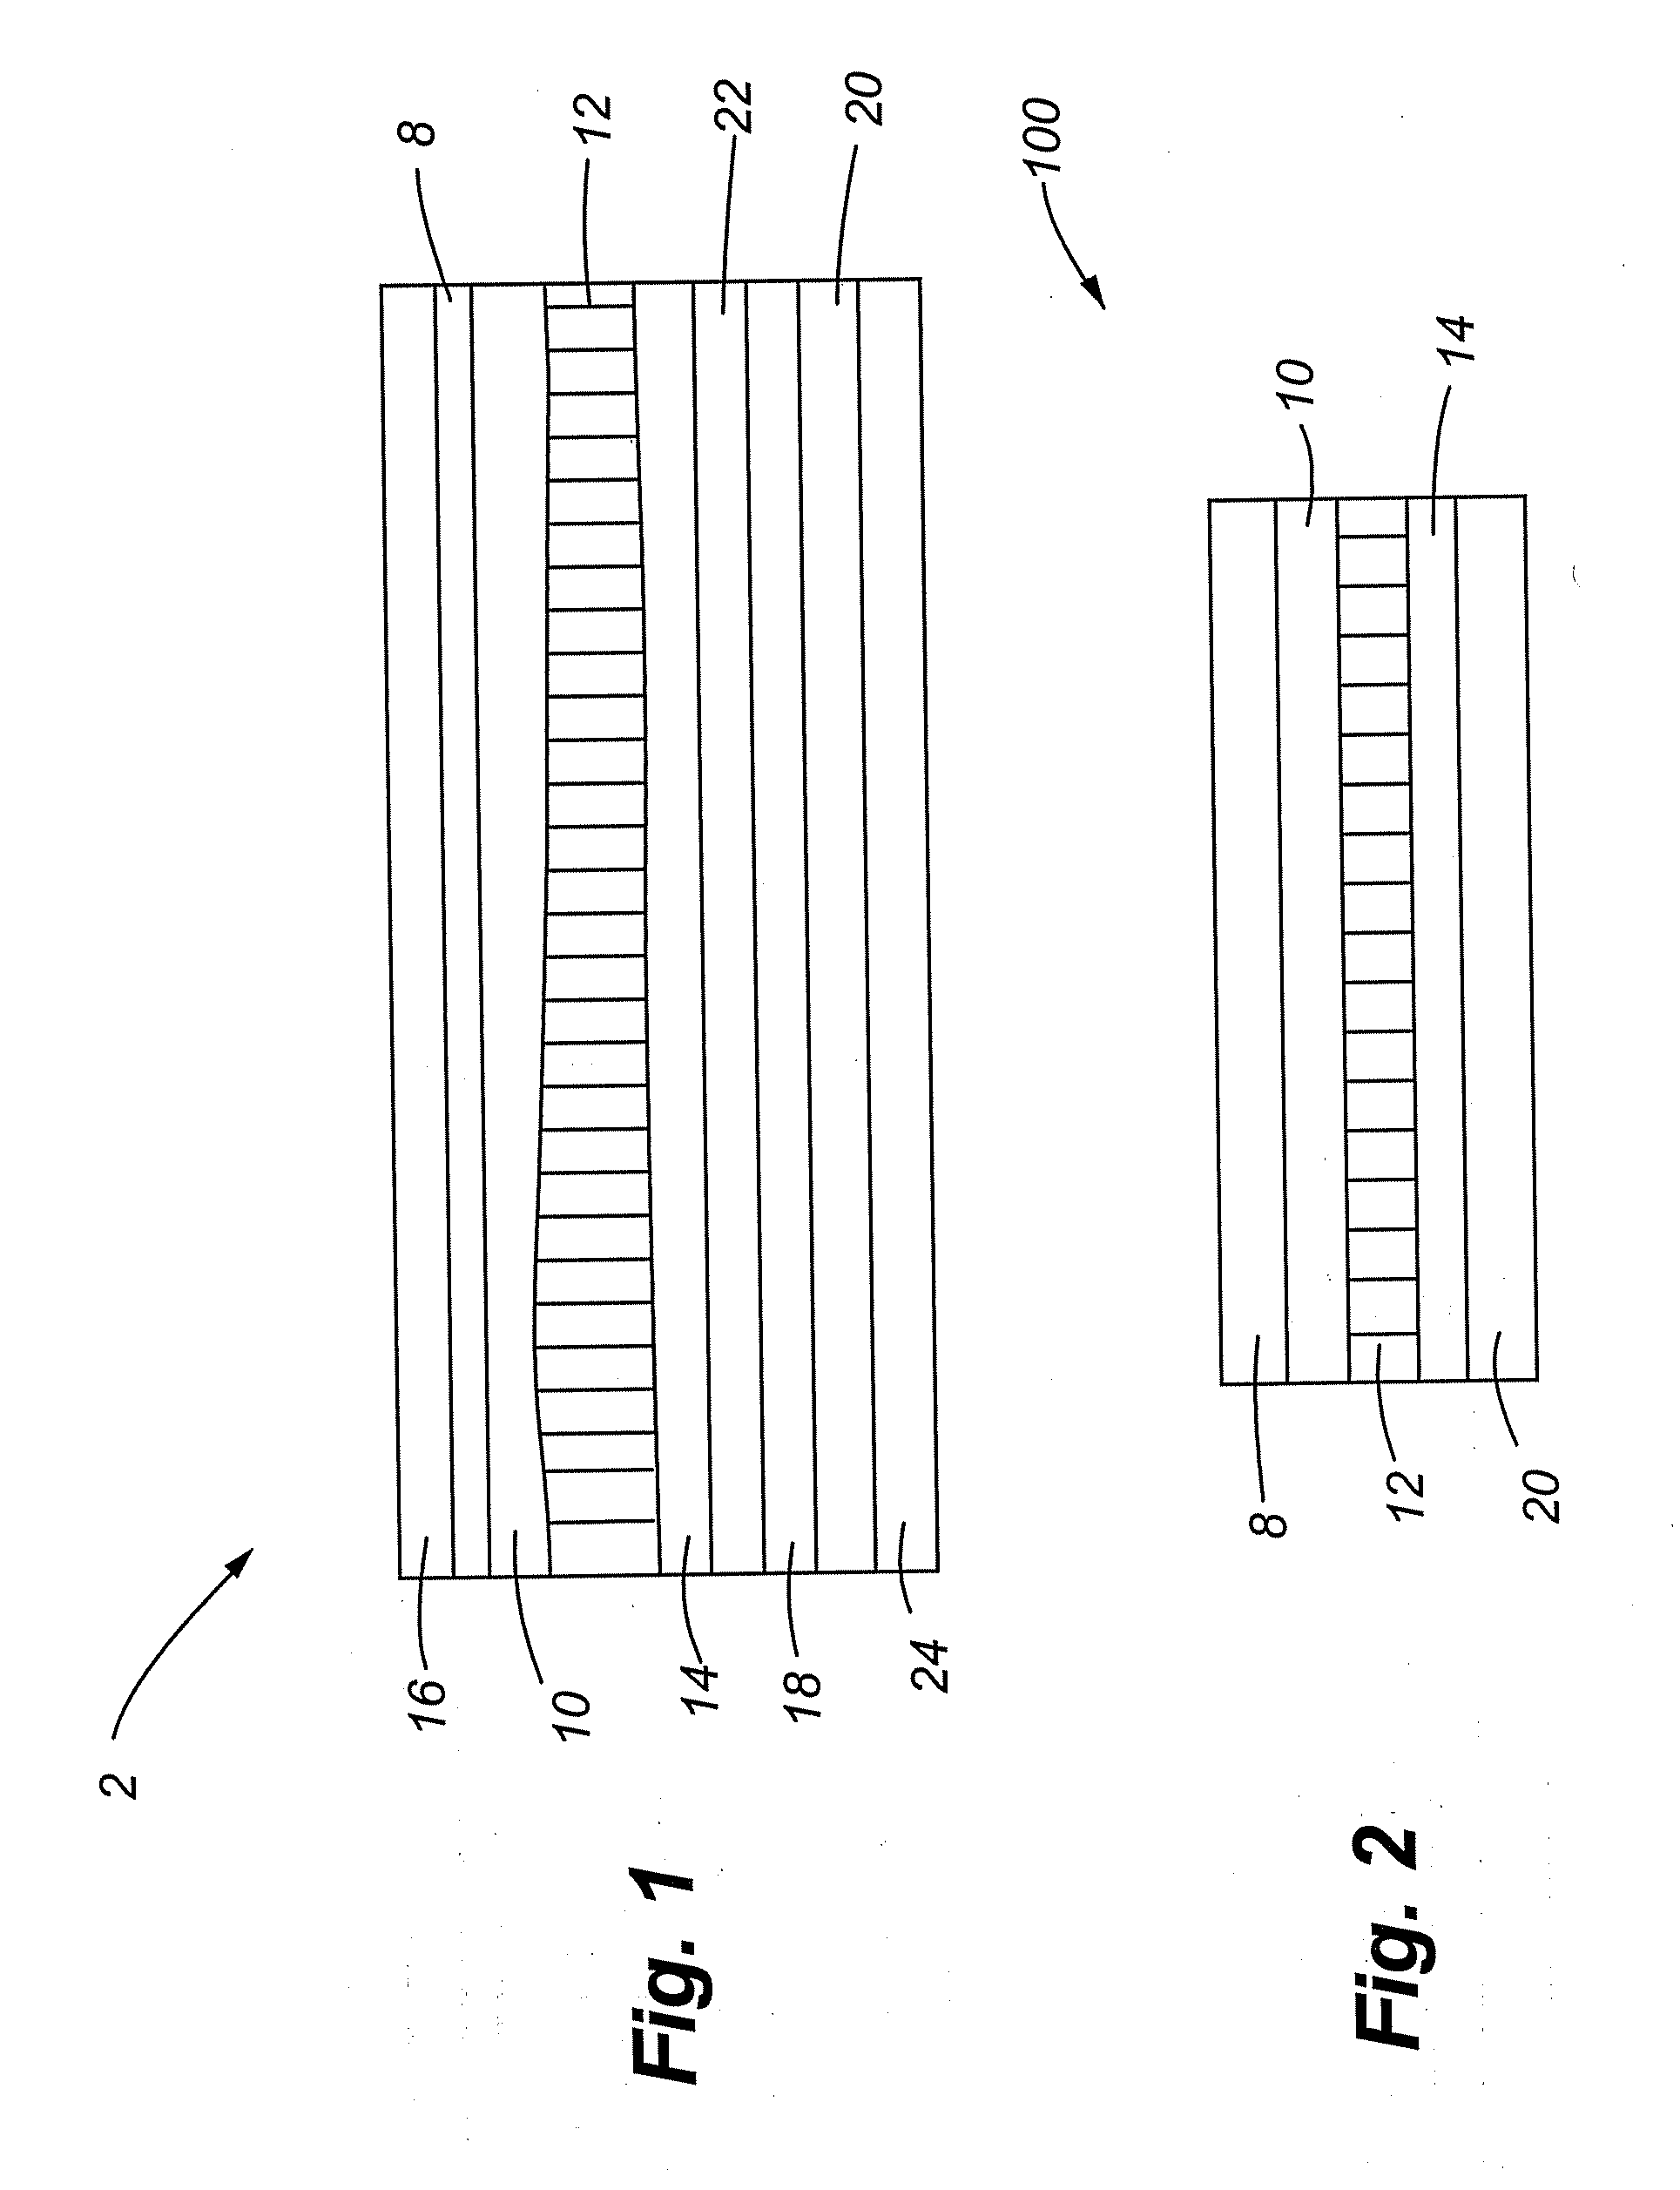 Heat moldable flock transfer with heat resistant, reusable release sheet and methods of making same